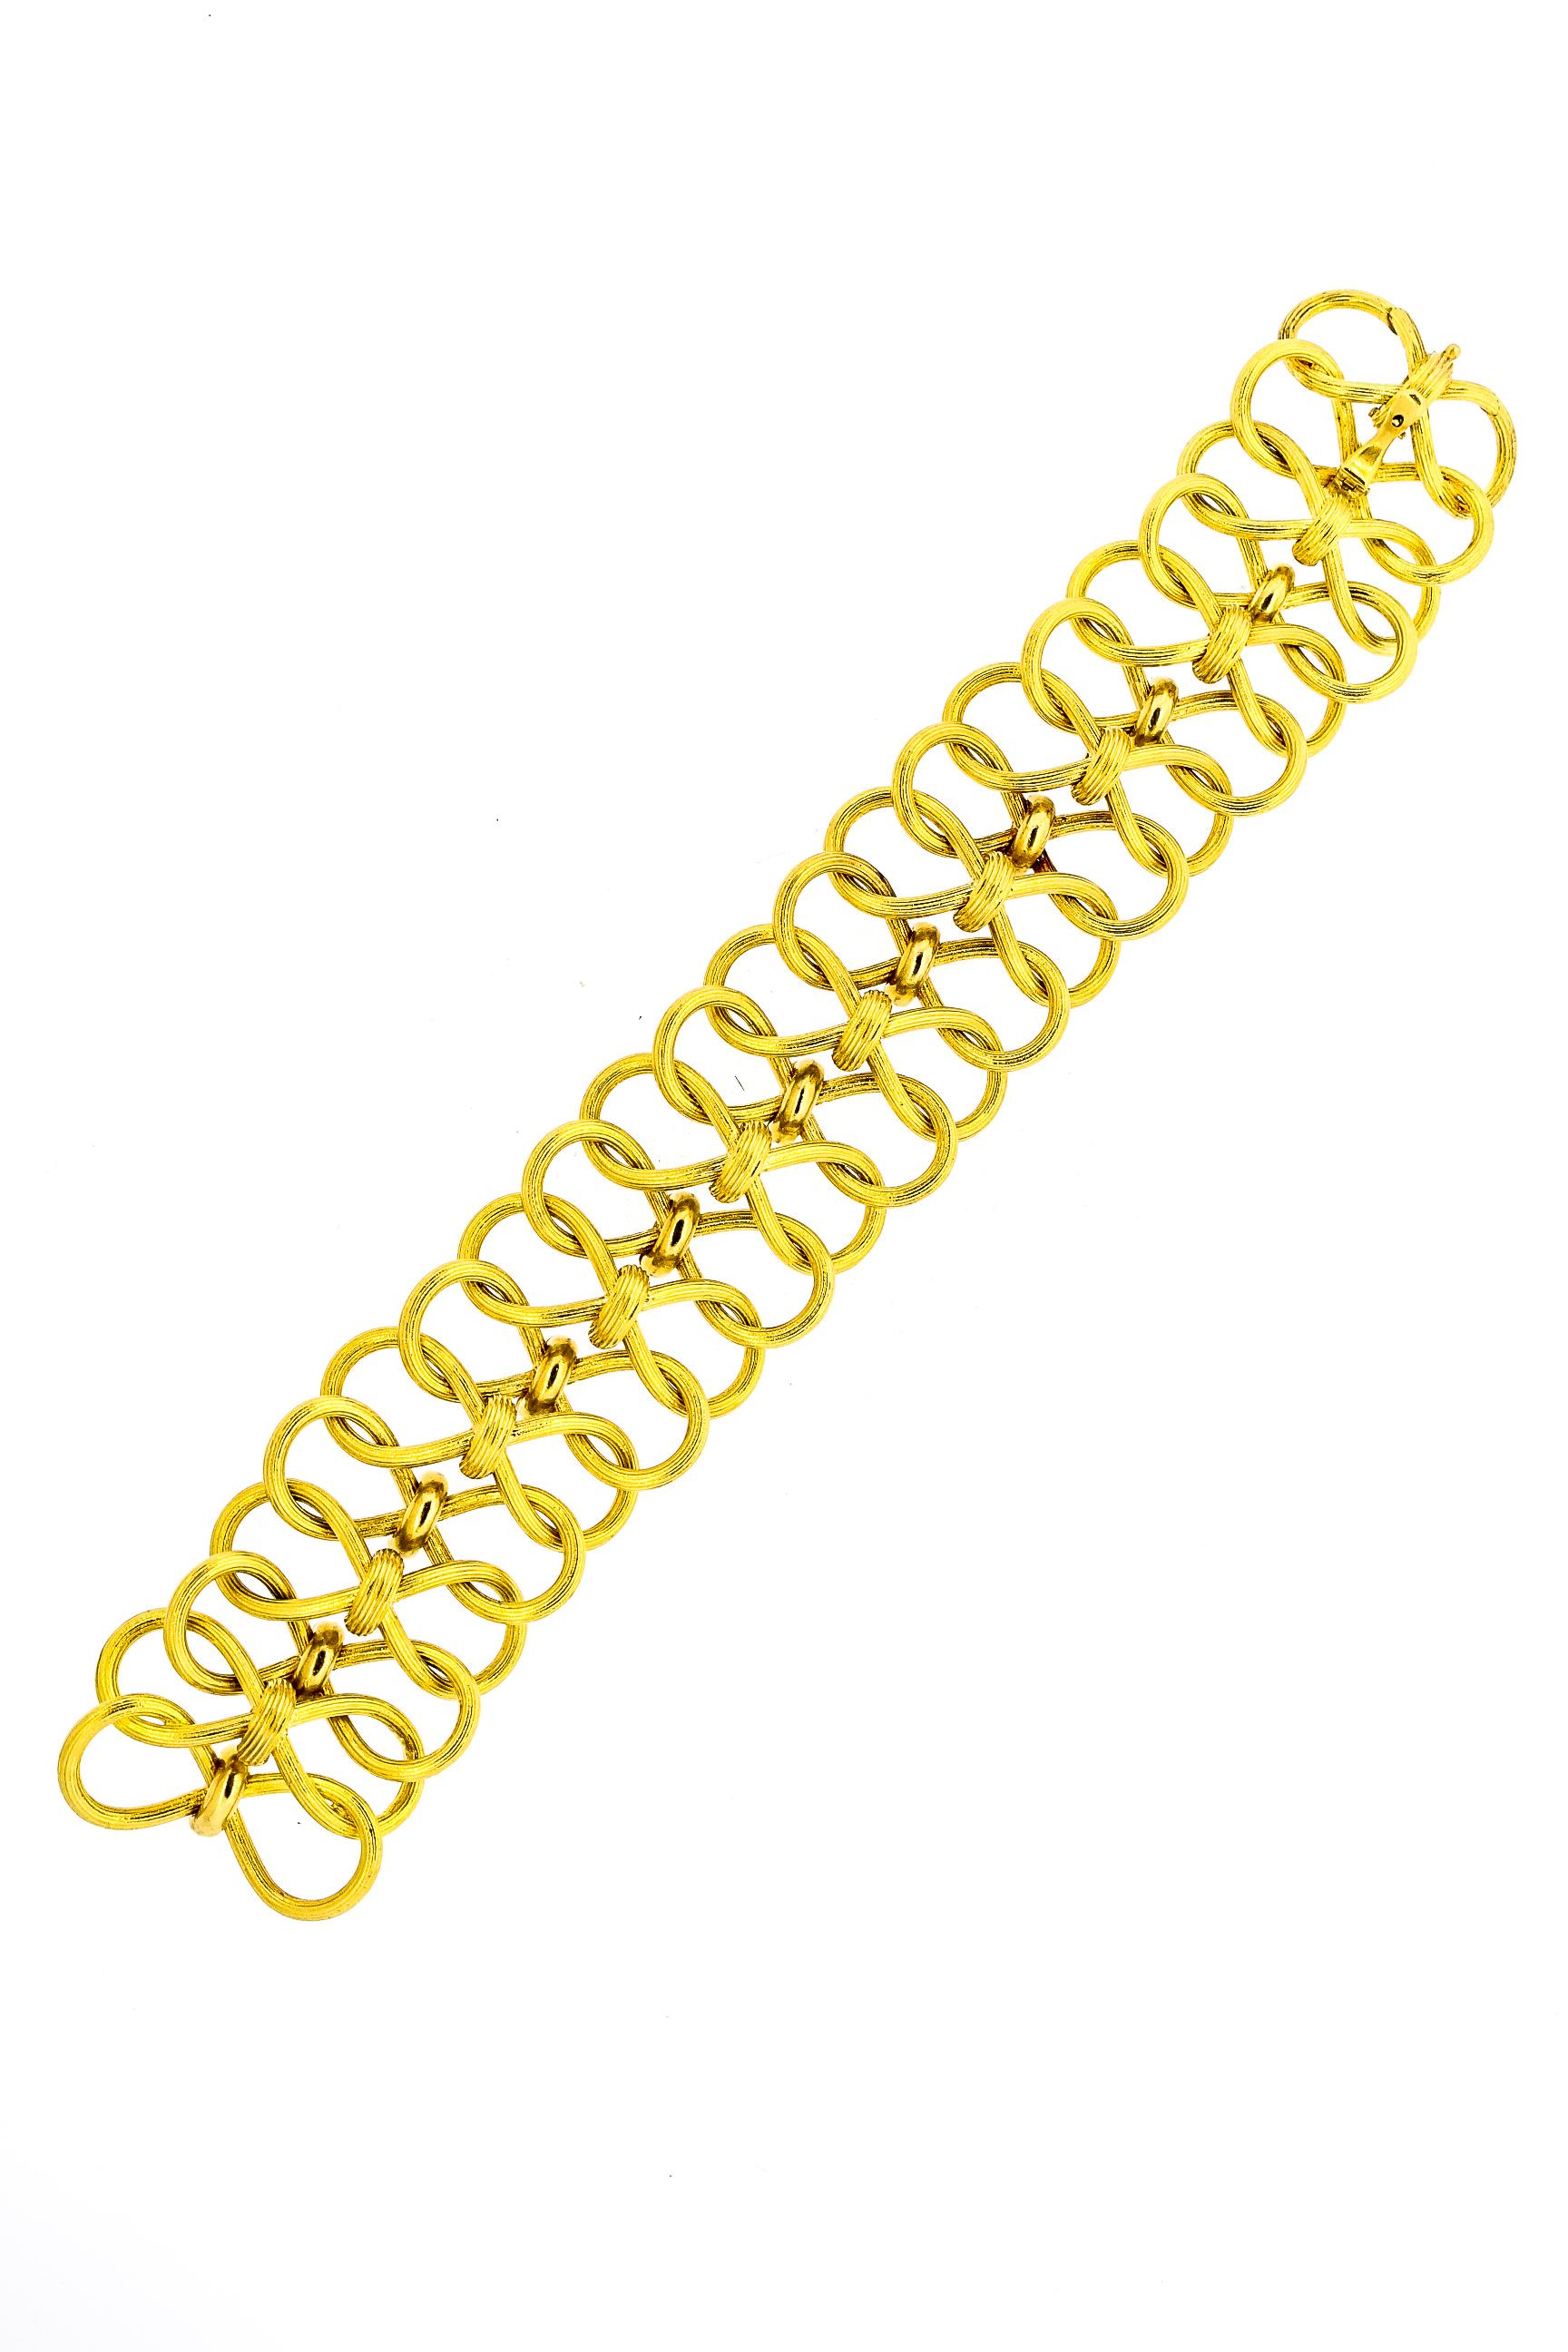 A unique rare 18k gold wide open link bracelet designed by Jean Schlumberger for Tiffany & Co. around the 1970s. This unusual link has textured gold loops that link in an under and over pattern. Schlumberger was an iconic designer for Tiffany & Co.